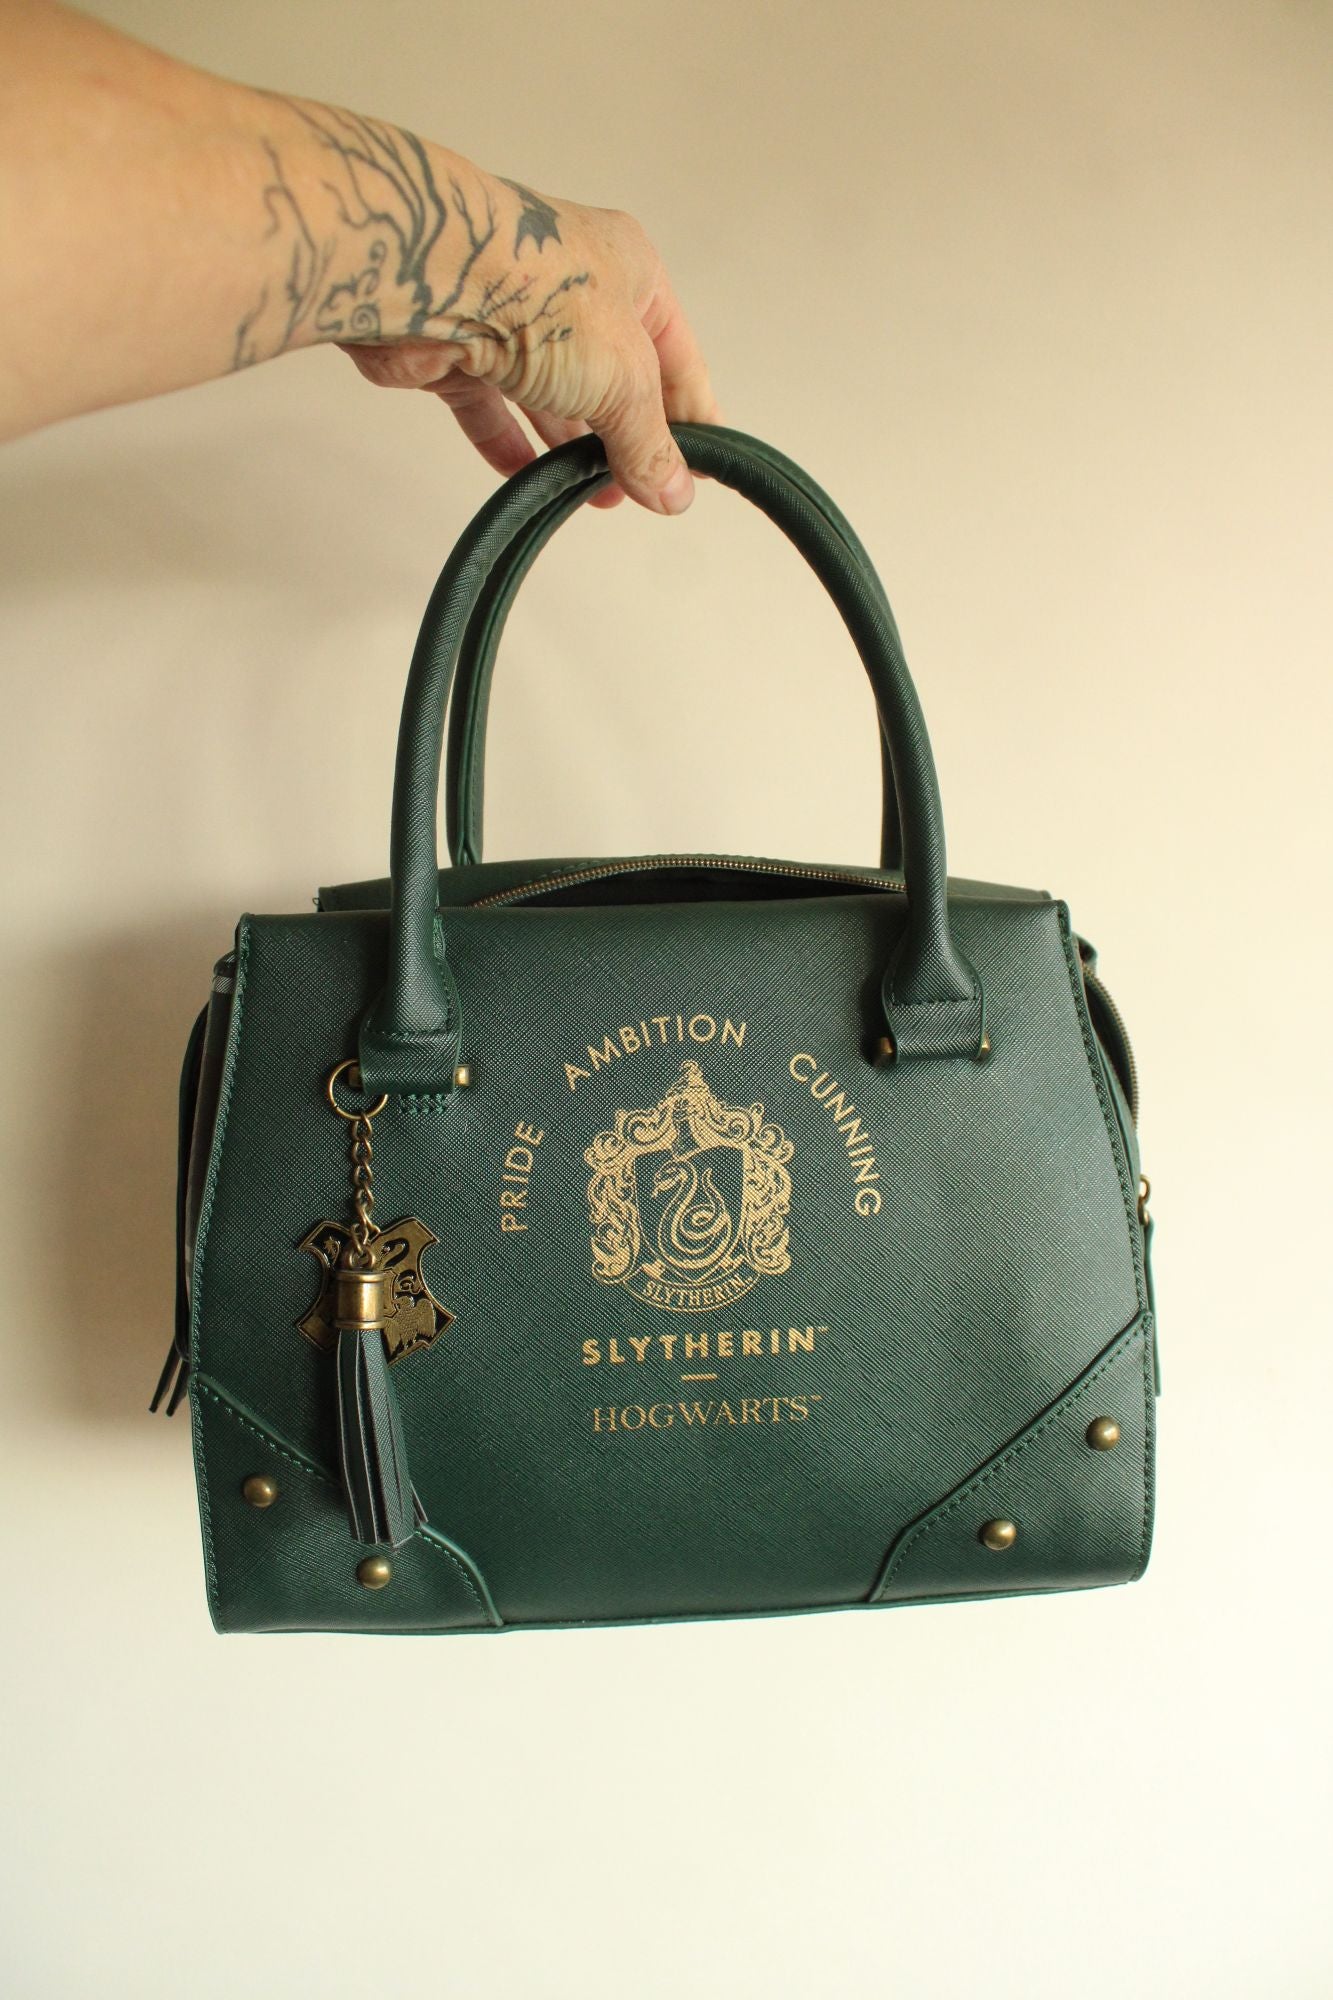 Bioworld Harry Potter Handbag, New with Some Tags, Slytherin House